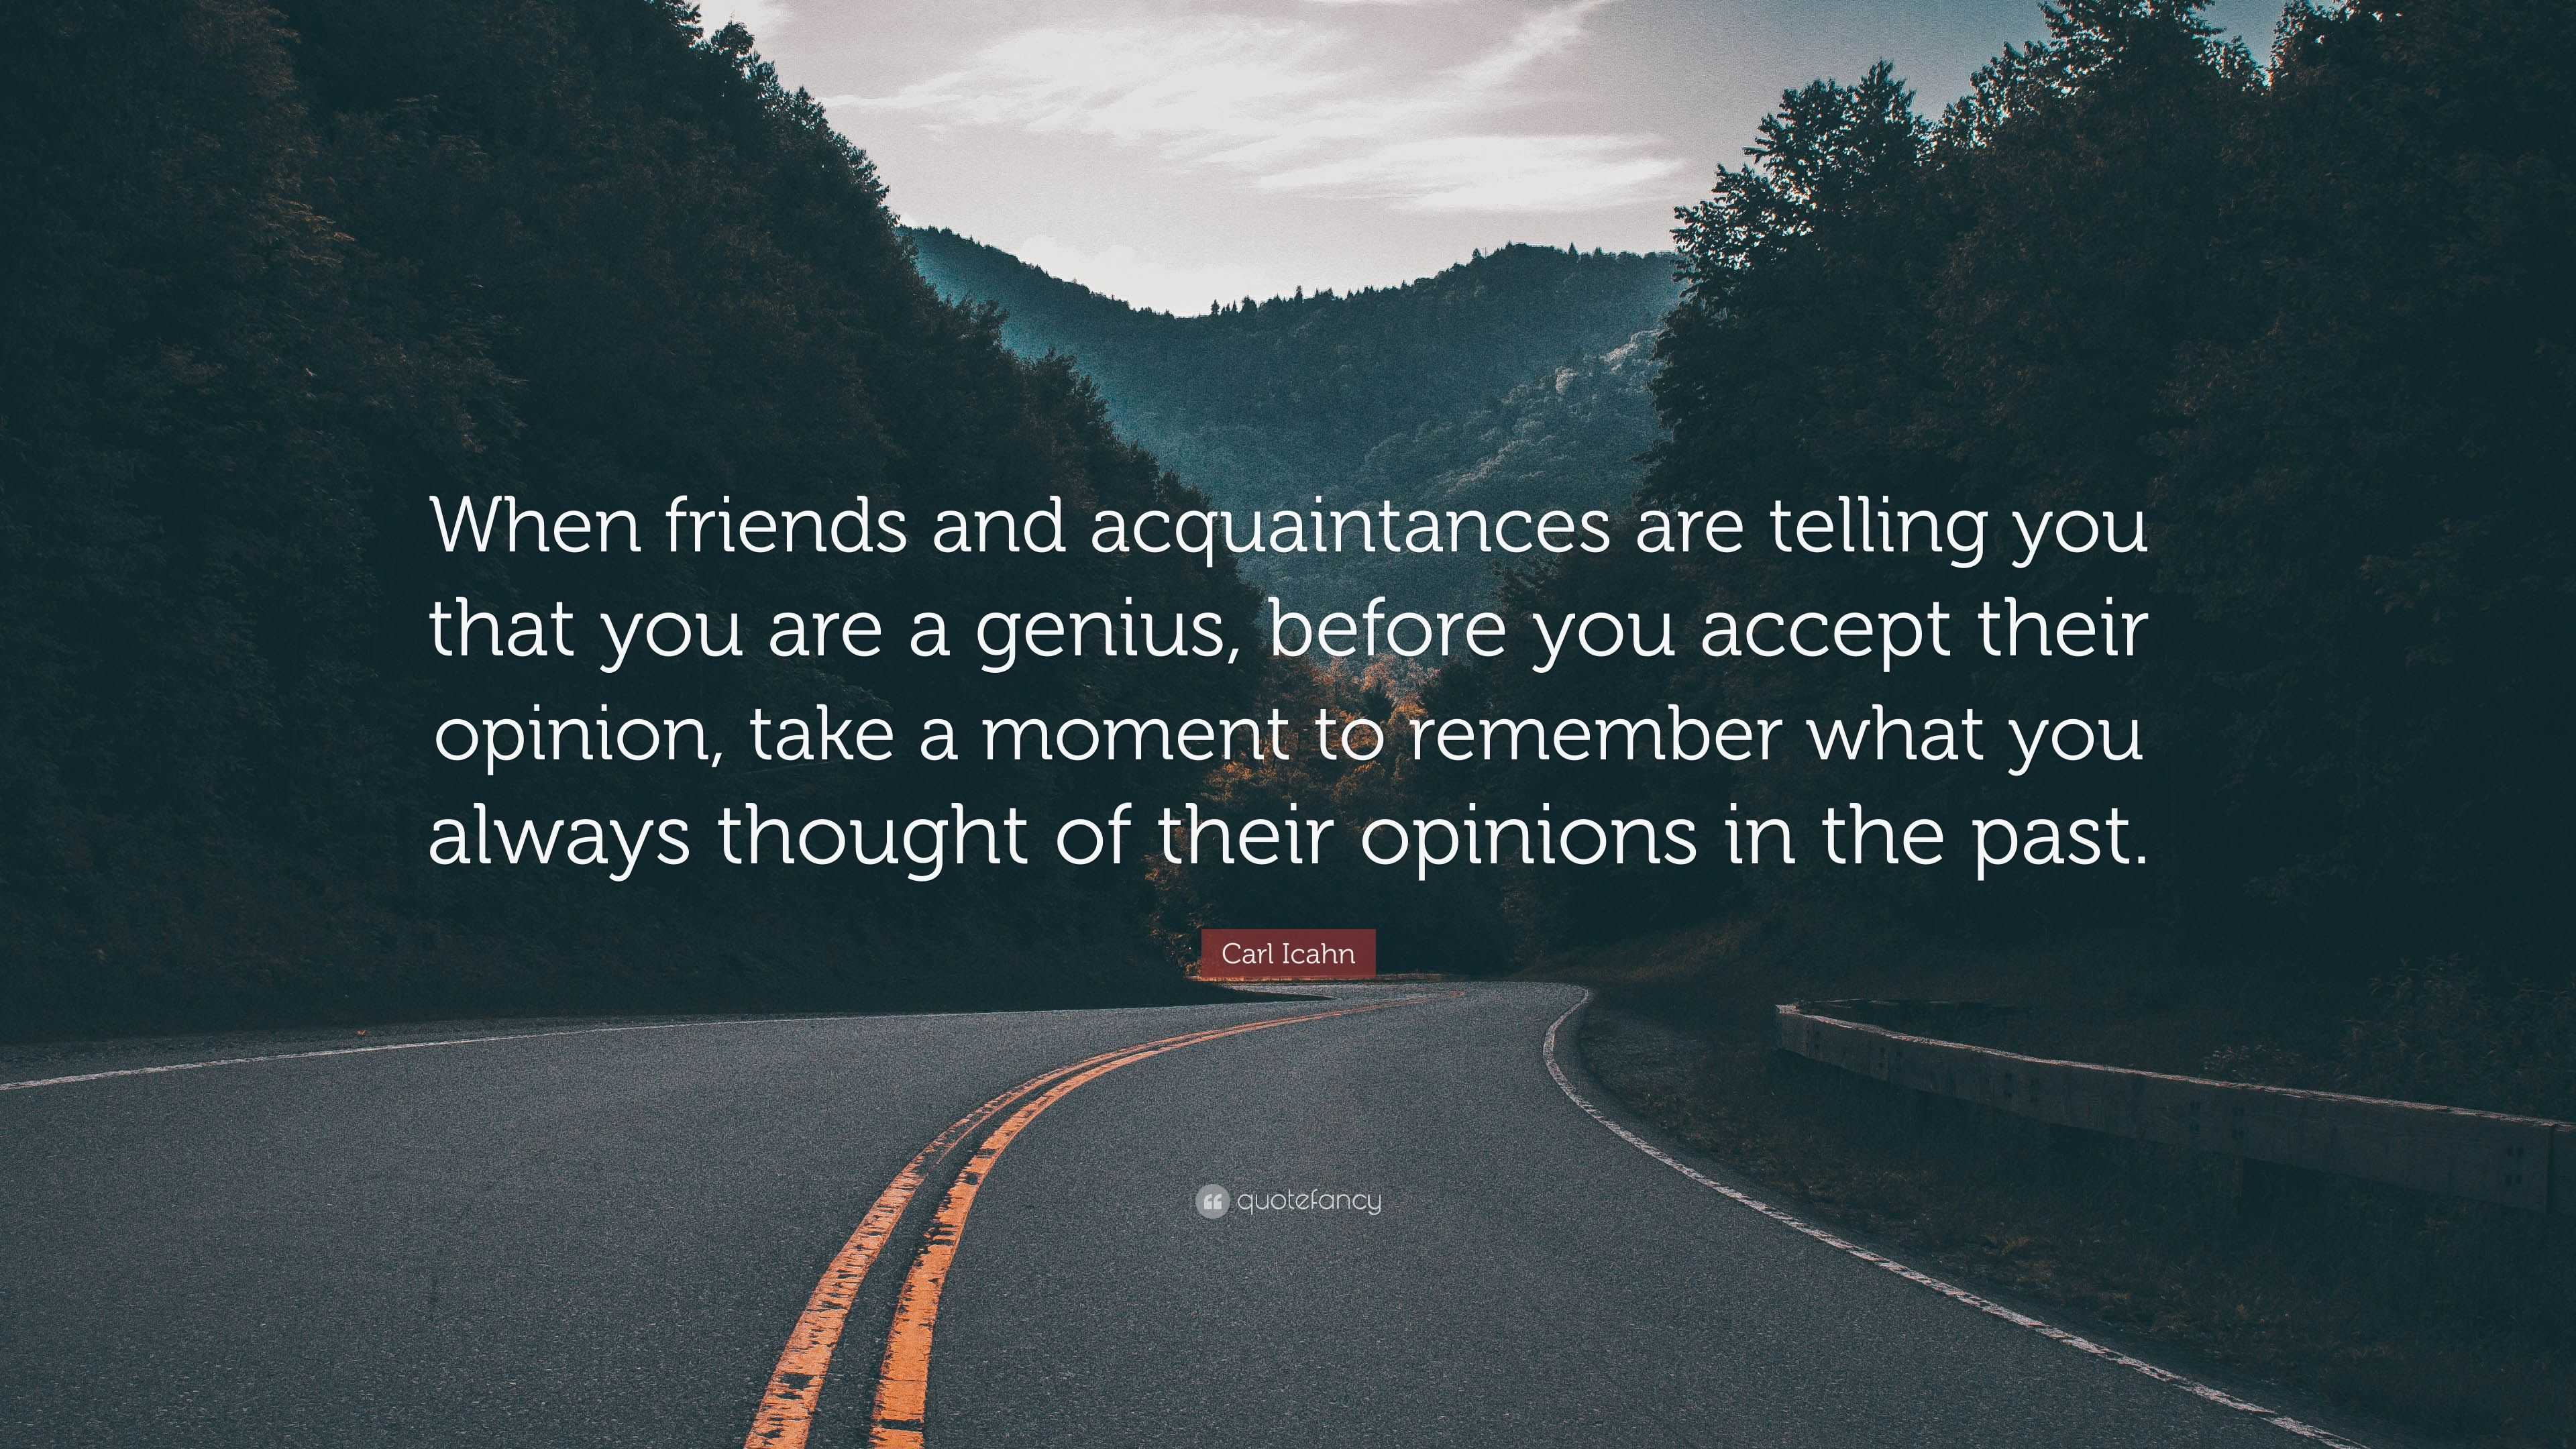 Carl Icahn Quote: “When friends and acquaintances are telling you that ...